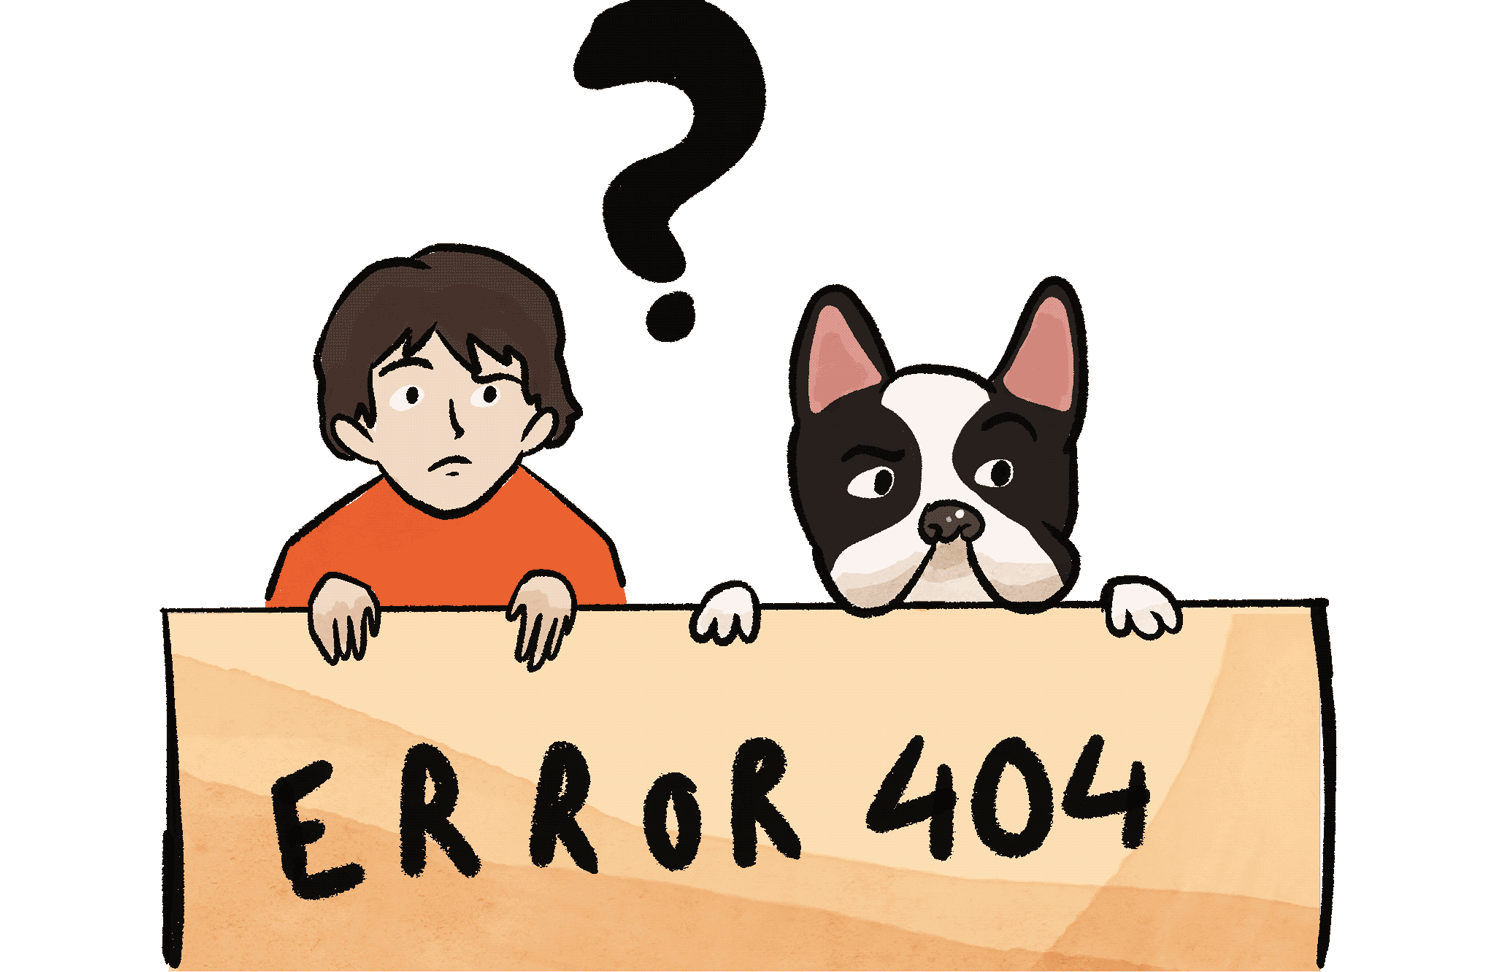 Marvin and Mia holding an error 404 sign